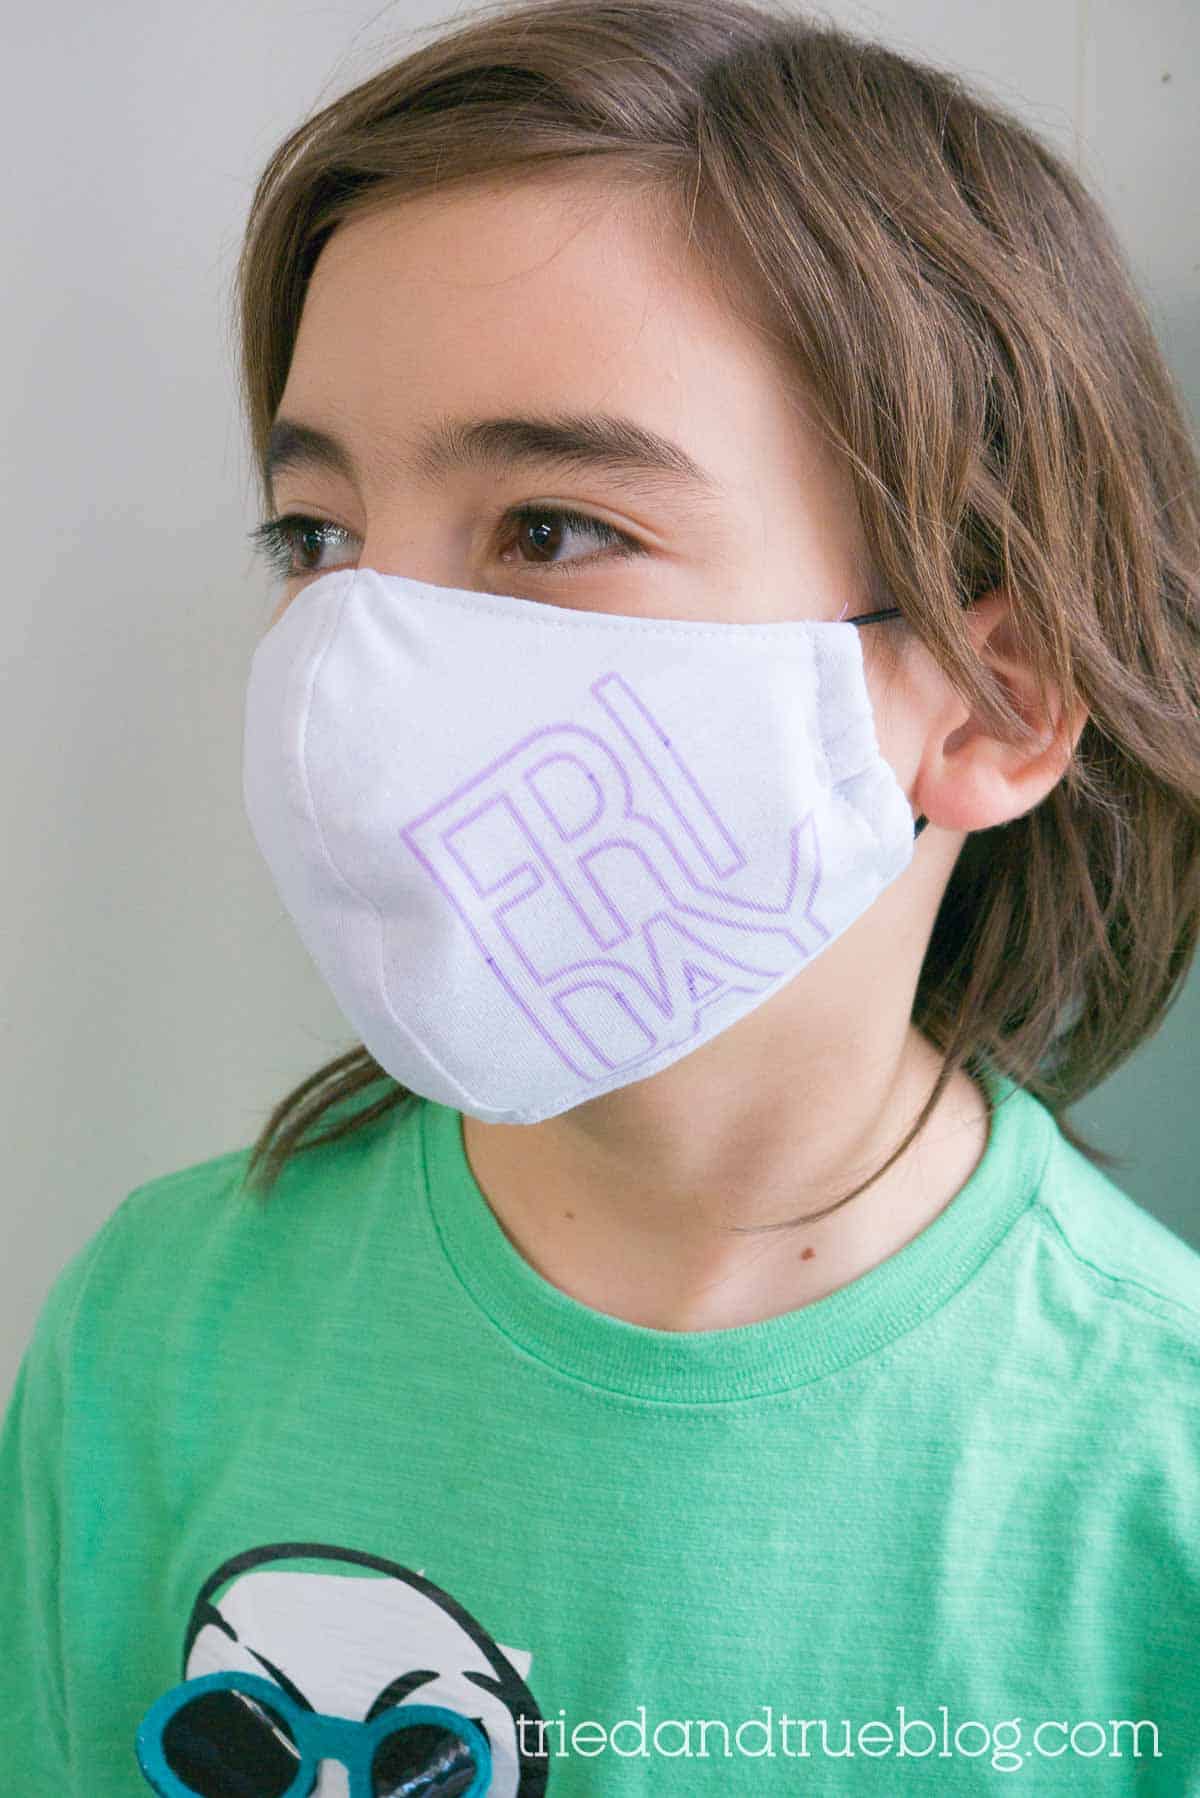 Child wearing face mask with 